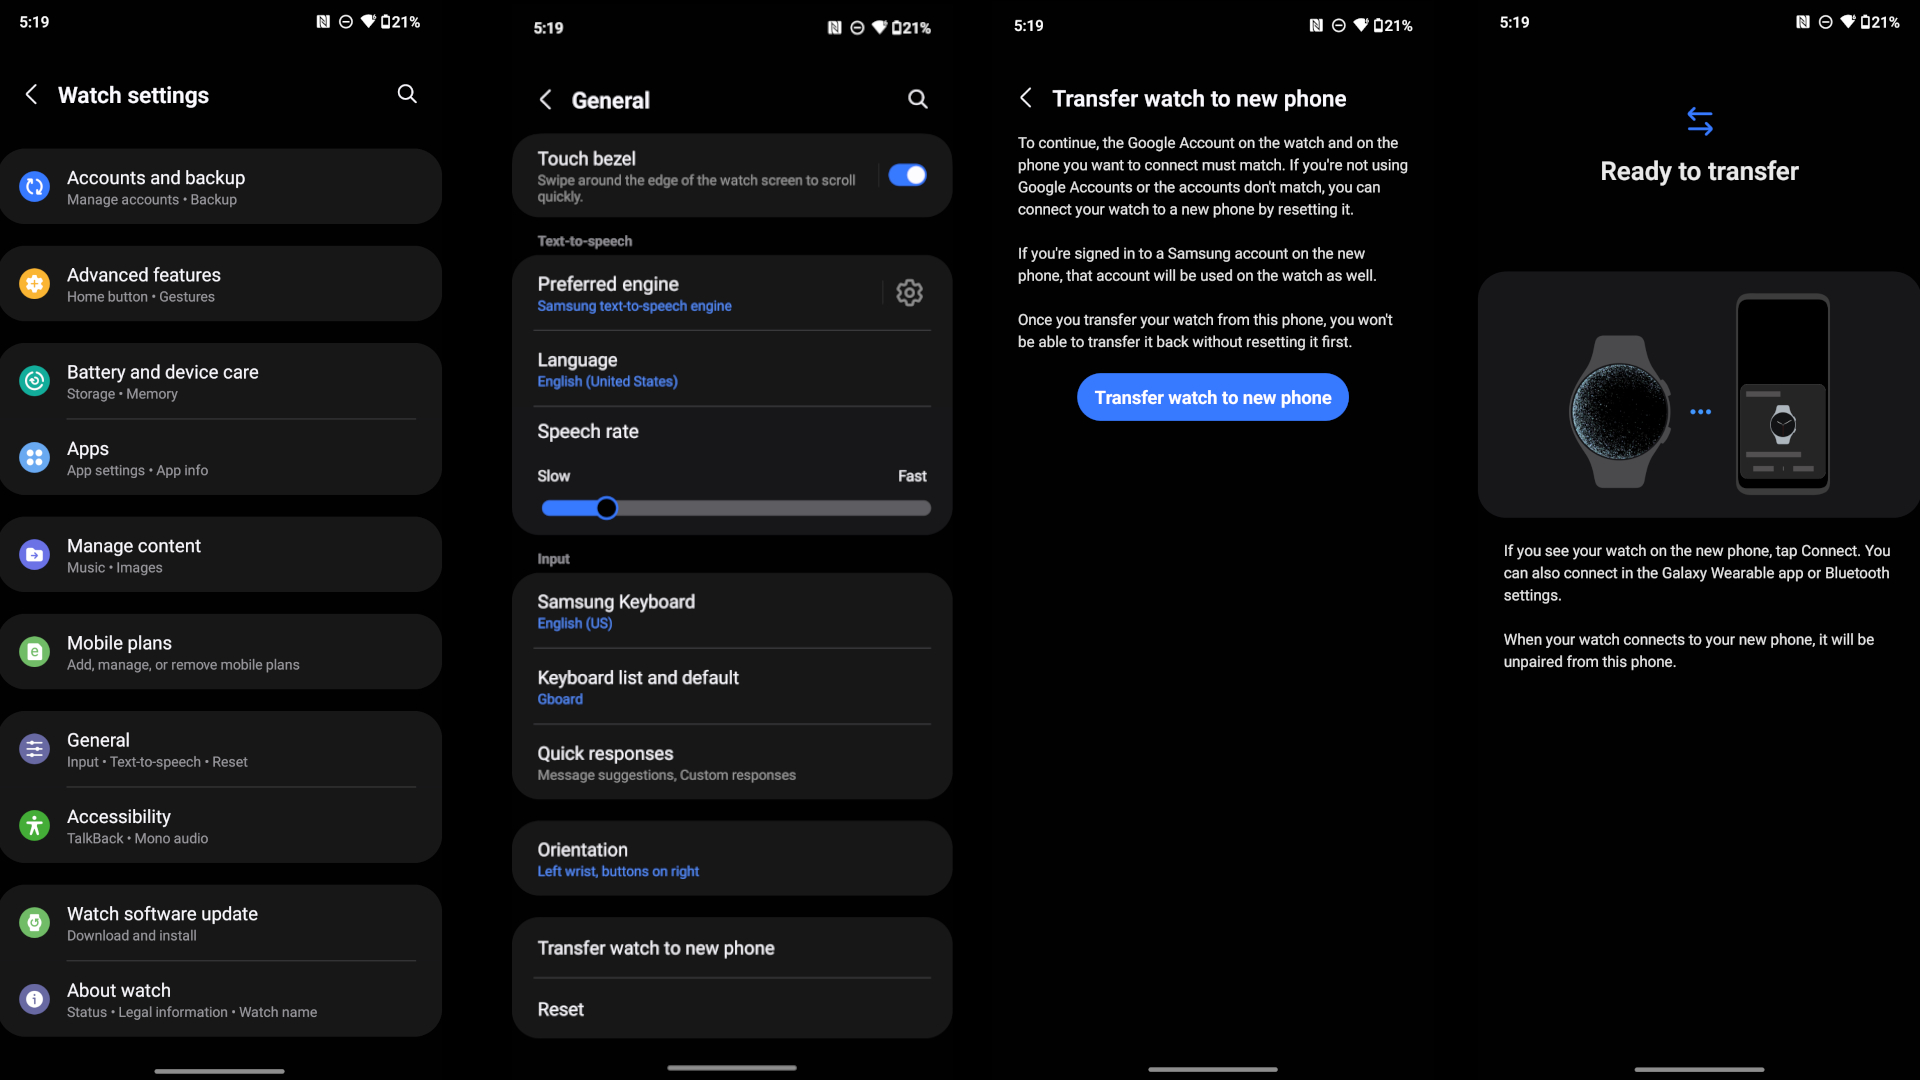 Four Samsung Wearable app screenshots showing the steps for transferring a Galaxy Watch to a new Android phone.